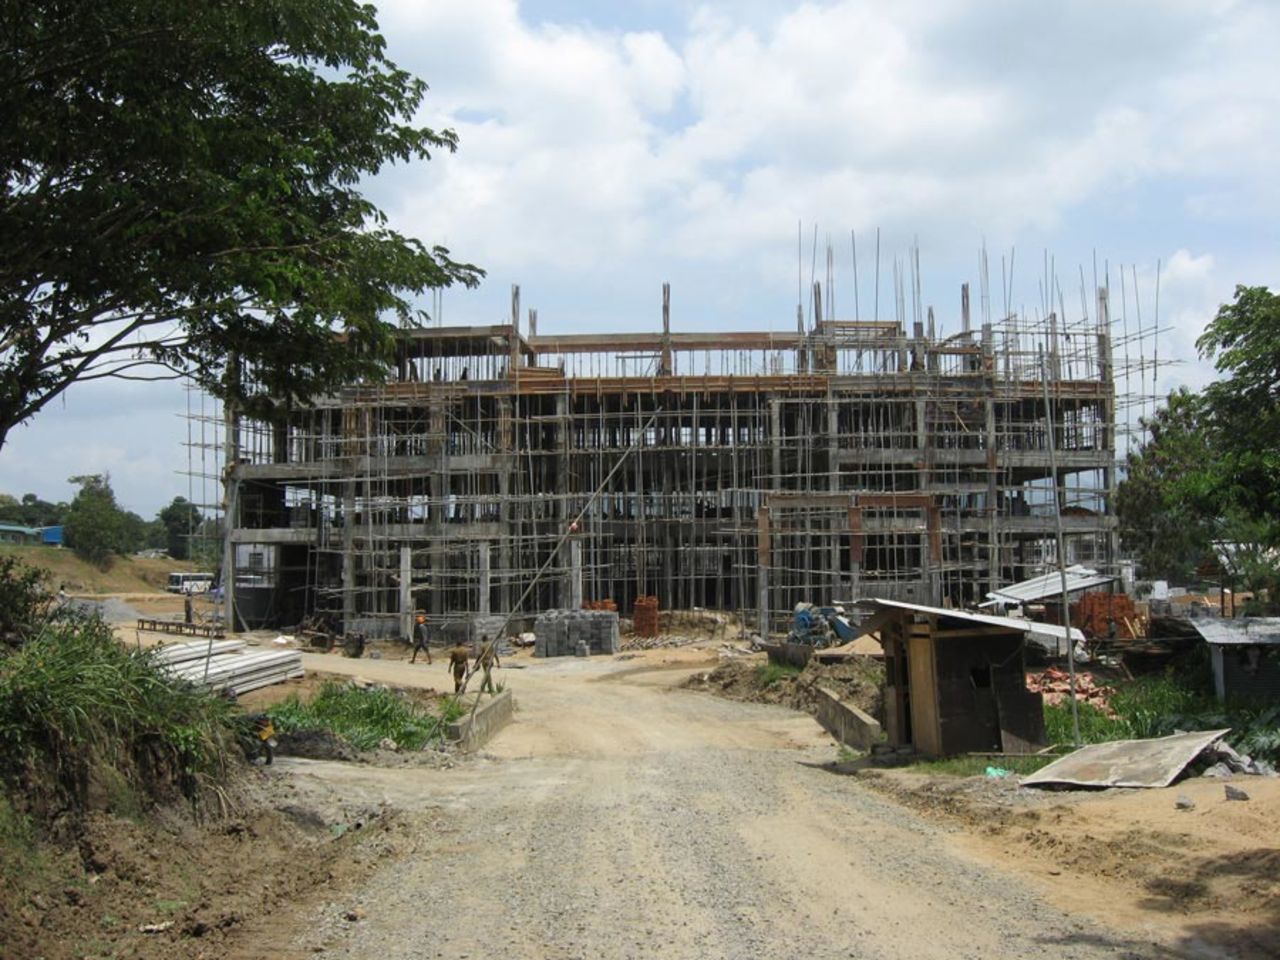 The entrance to the stadium in Pallekele at the time of construction, Pallekele, August 23, 2010